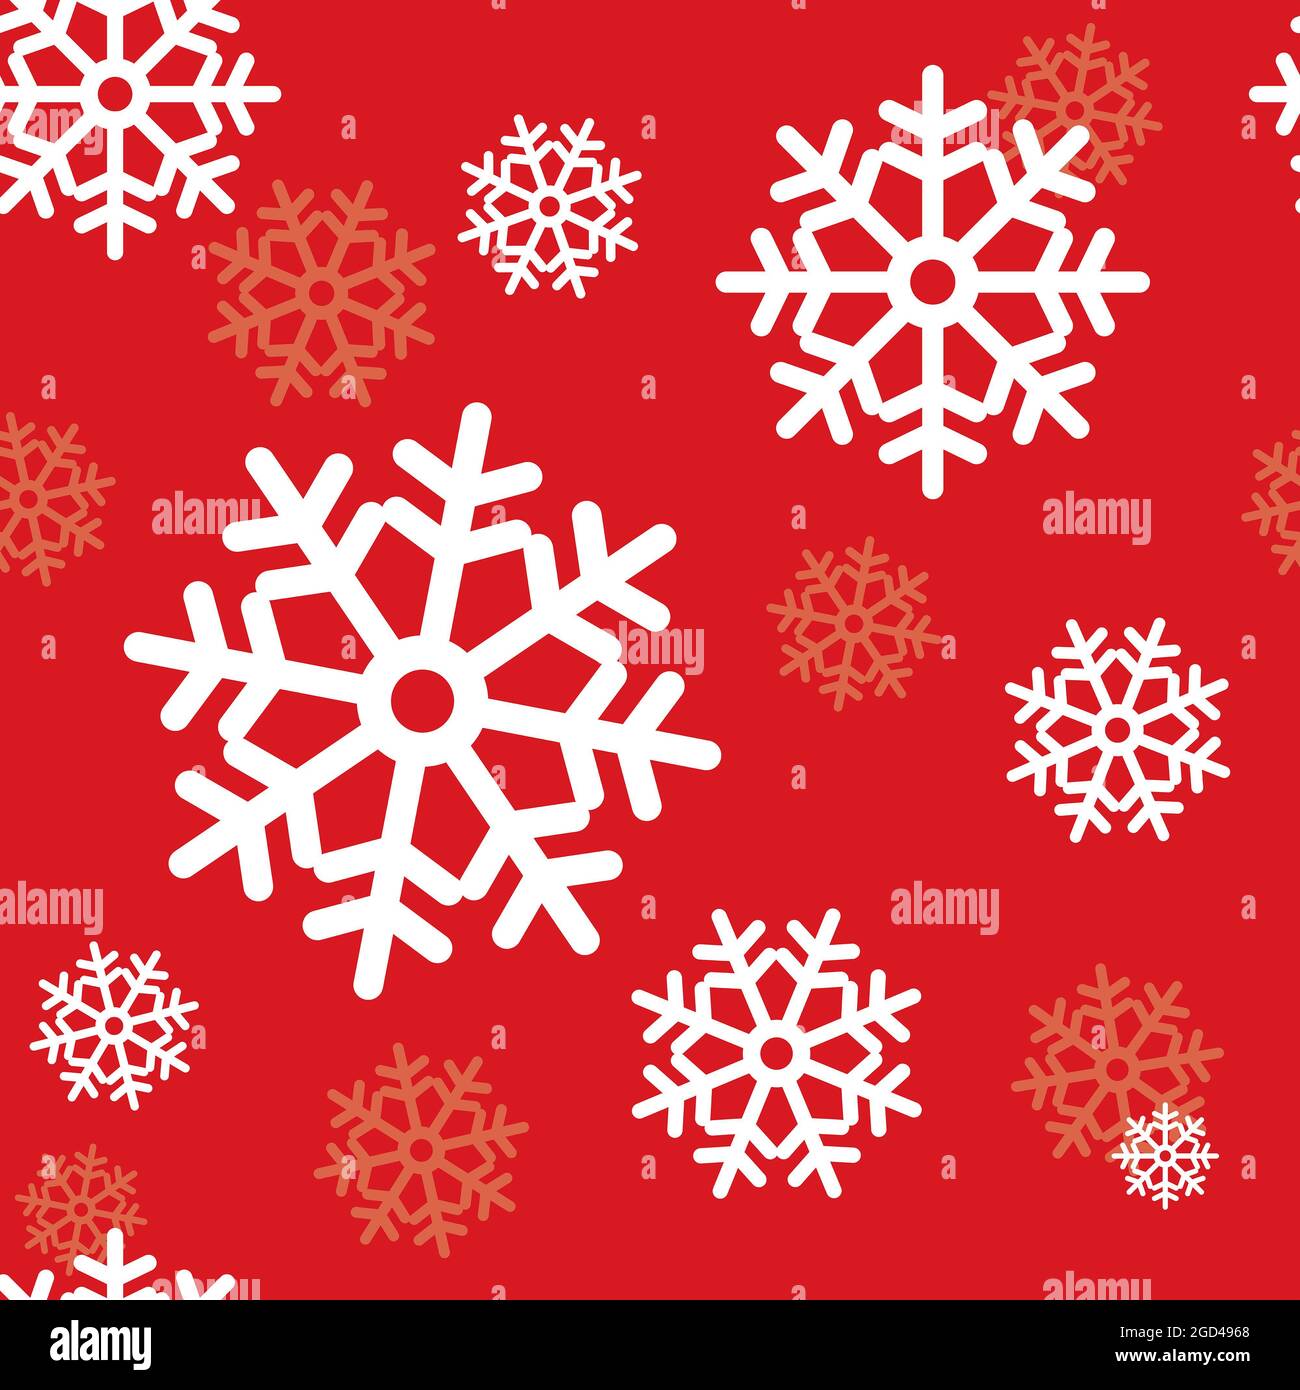 Vector seamless pattern for winter, simple graphic snowflakes on red background. Seamless pattern for Christmas, new year background. Stock Photo